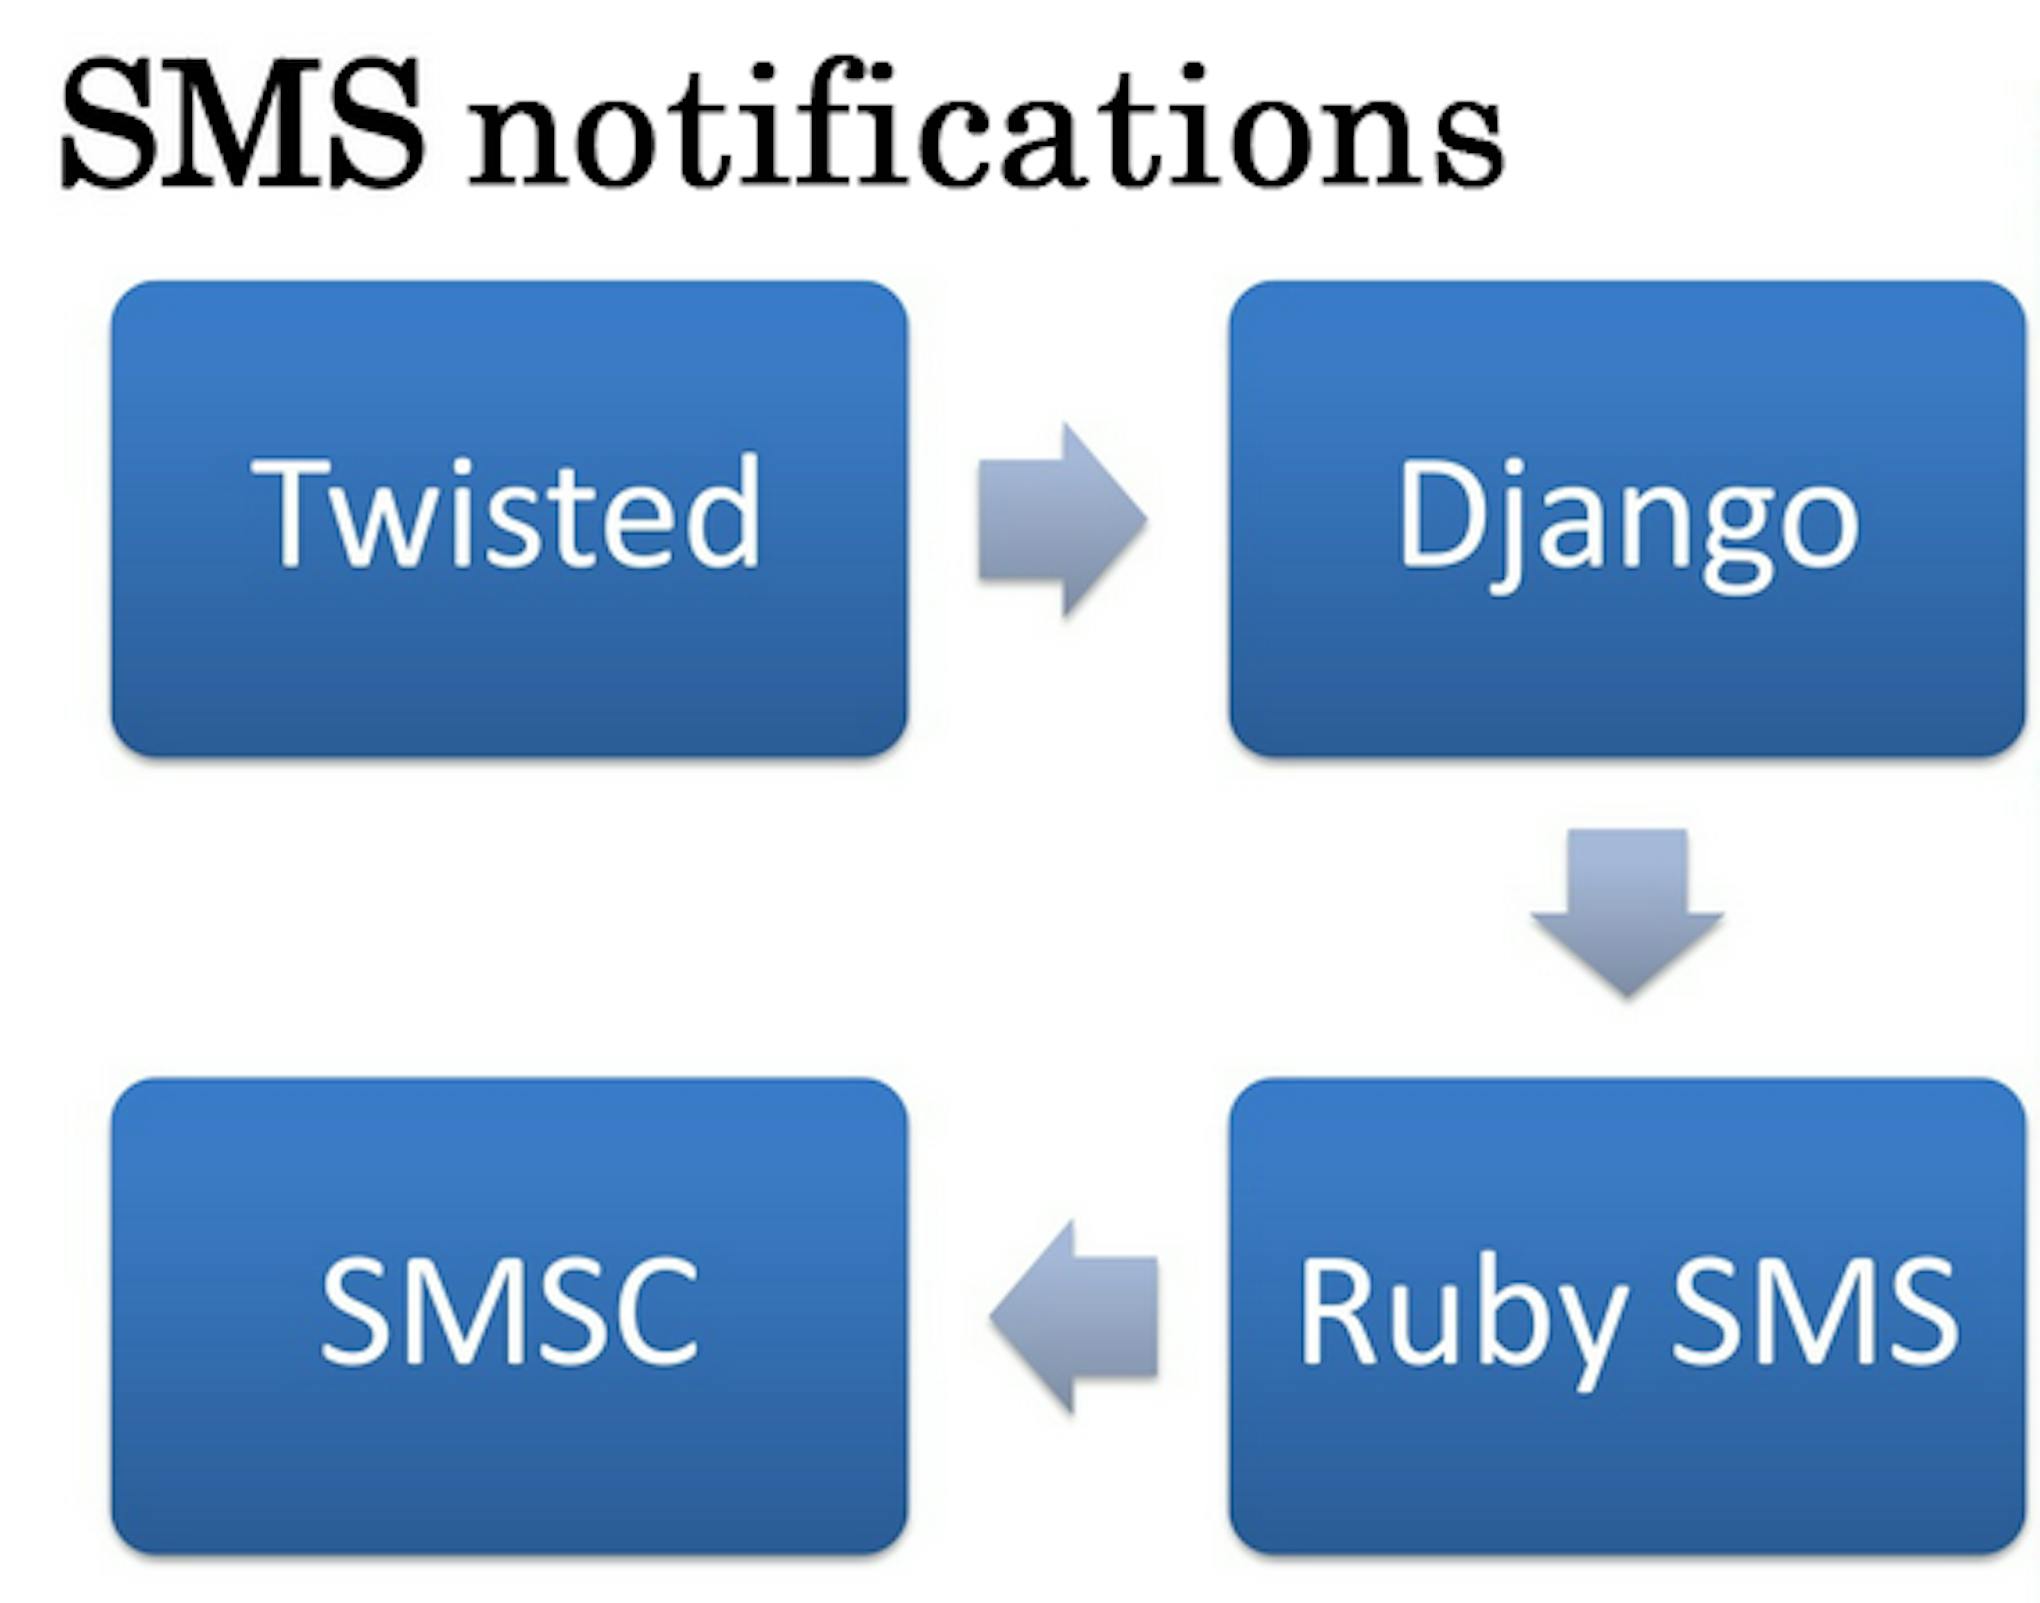 SMS Notifications in Taxi Services.